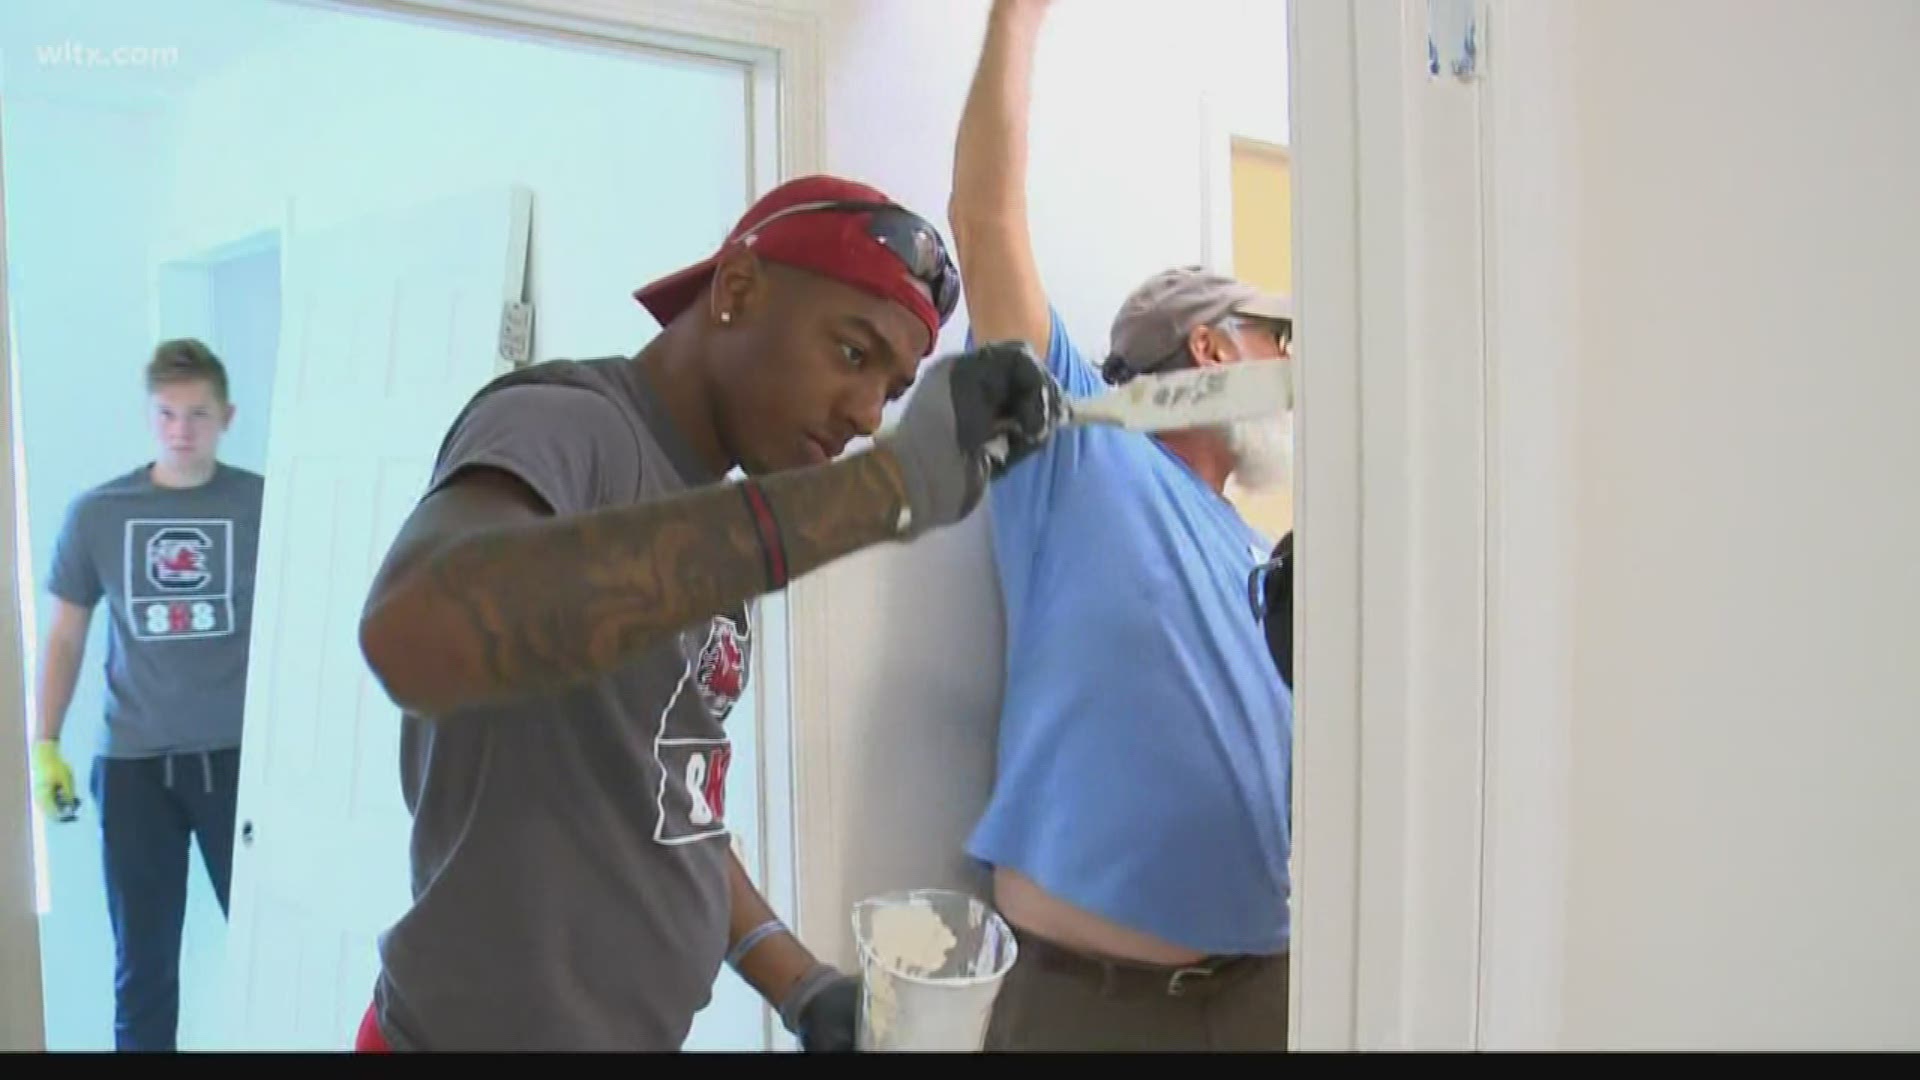 Saturday, the guys were helping put the finishing touches on one of the houses built by Habitat for Humanity.